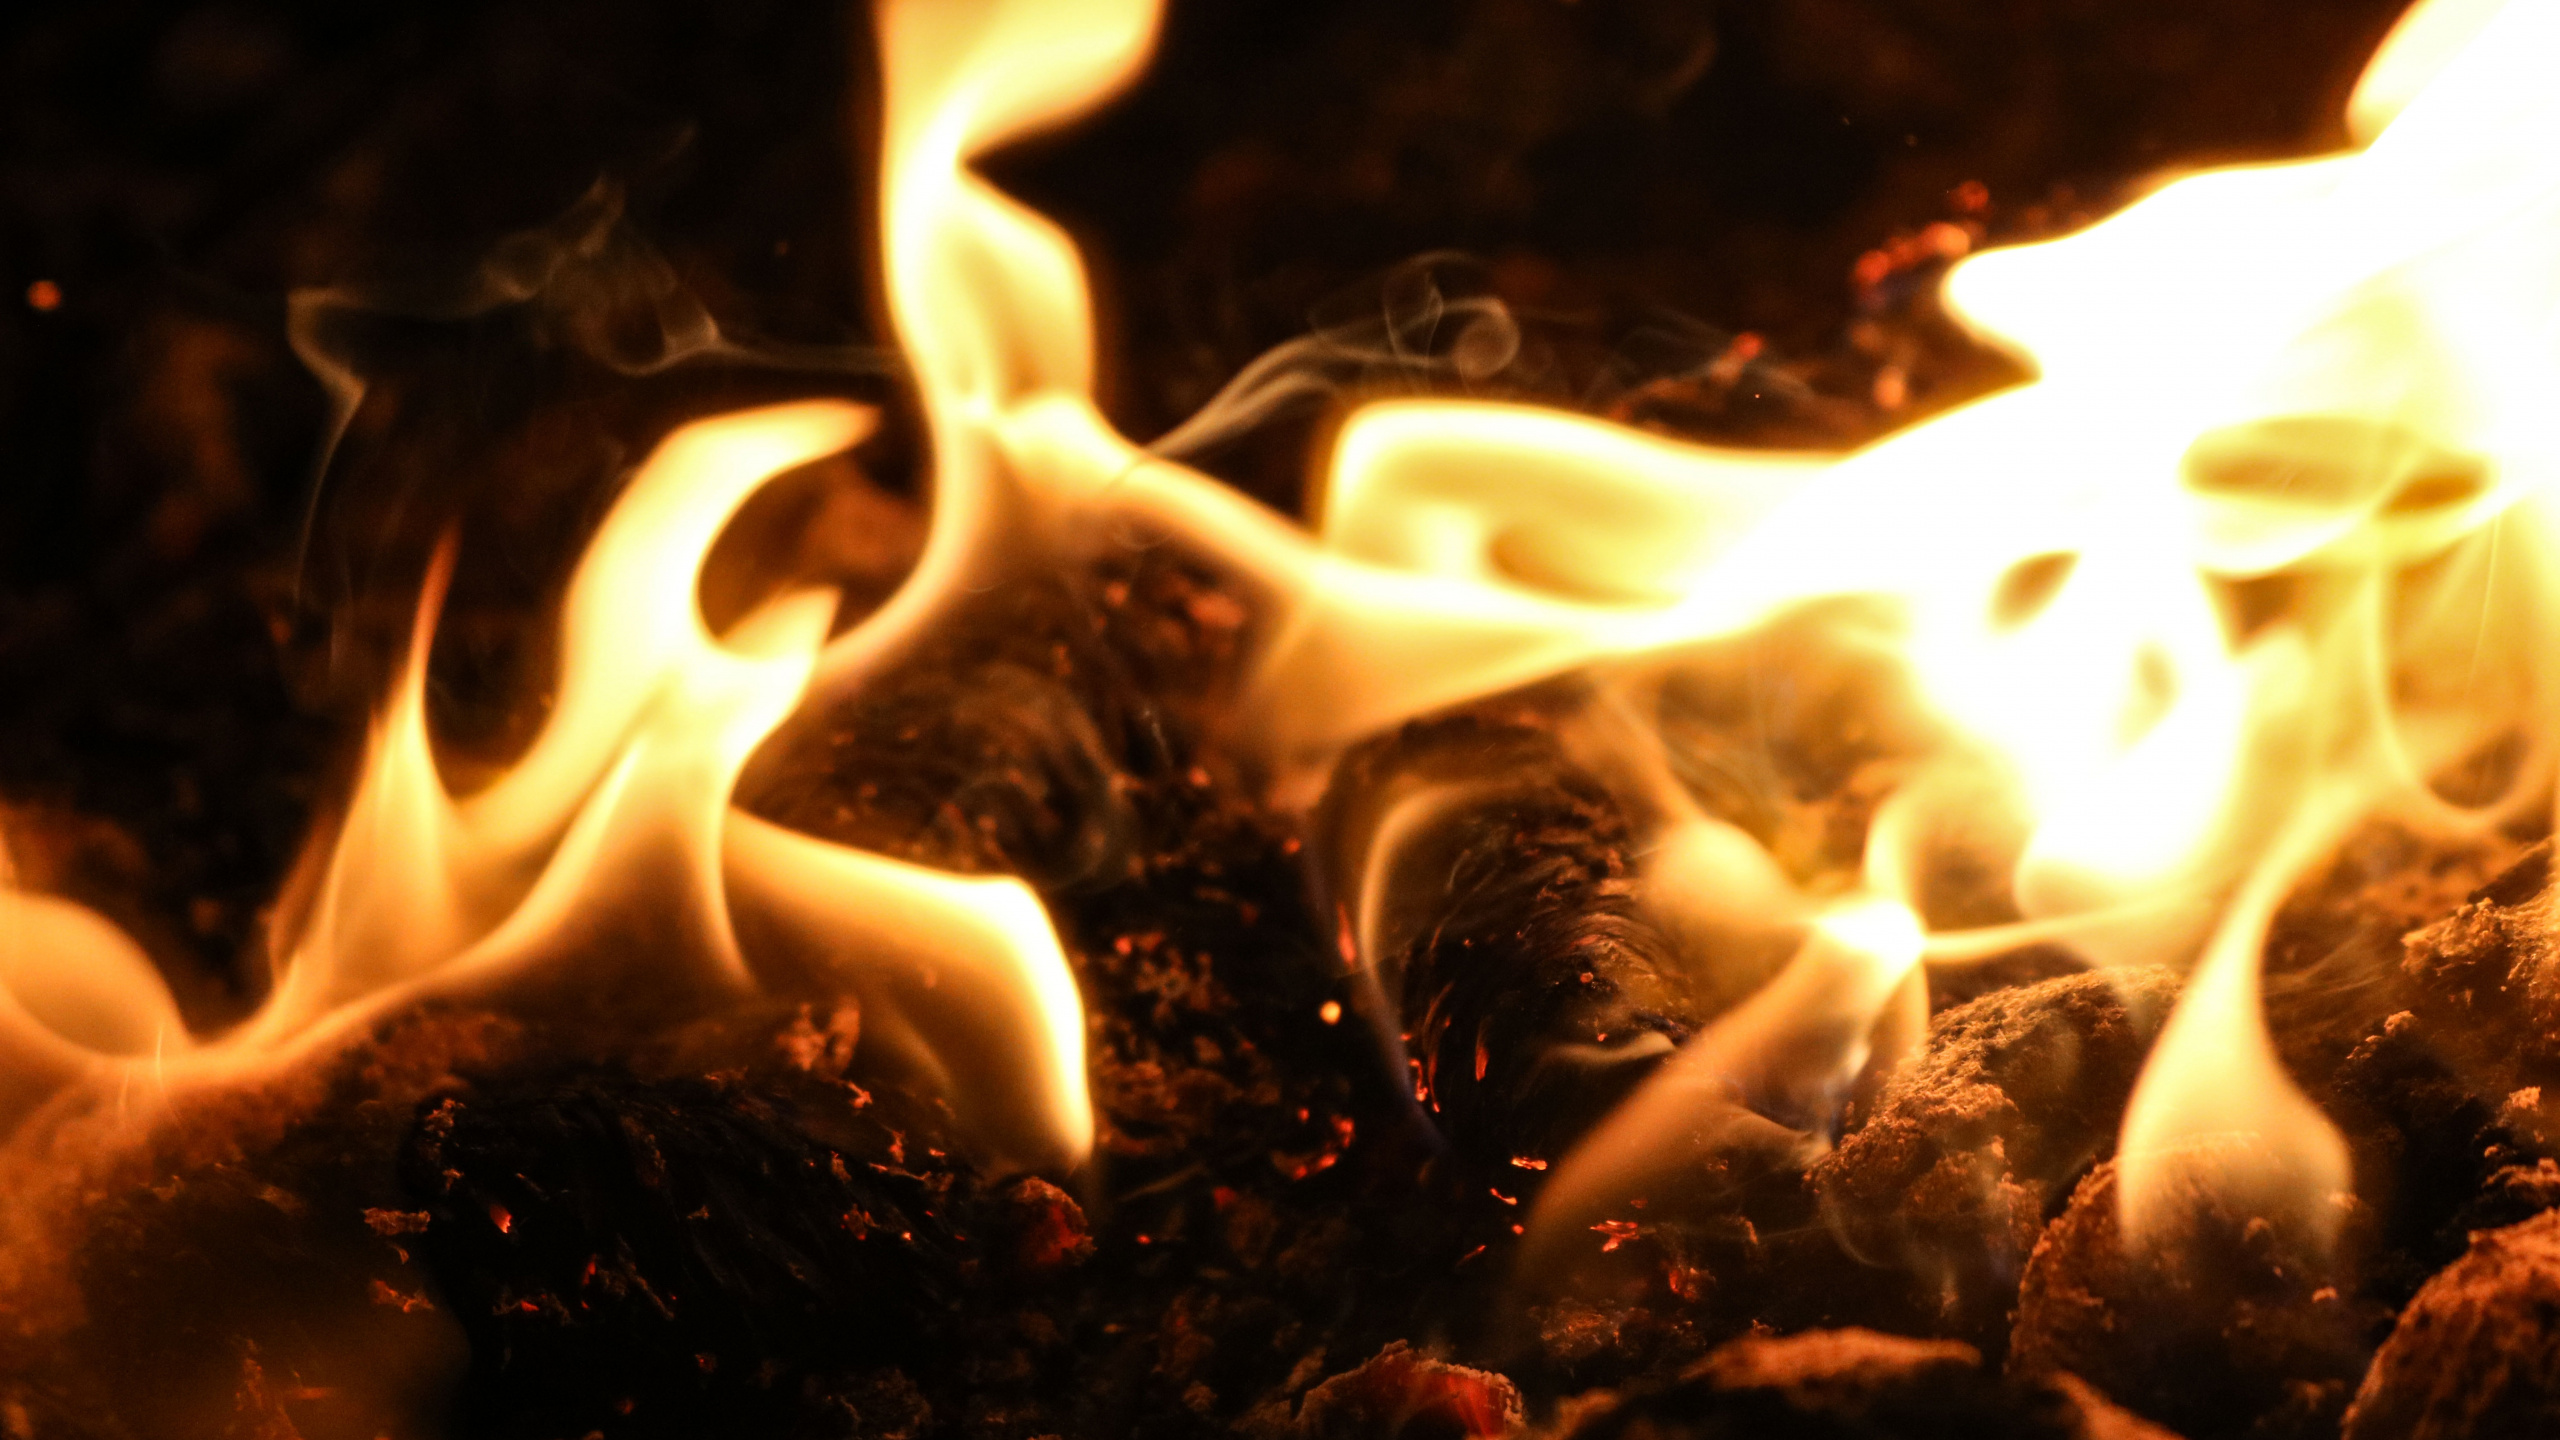 Fire in The Dark During Night Time. Wallpaper in 2560x1440 Resolution